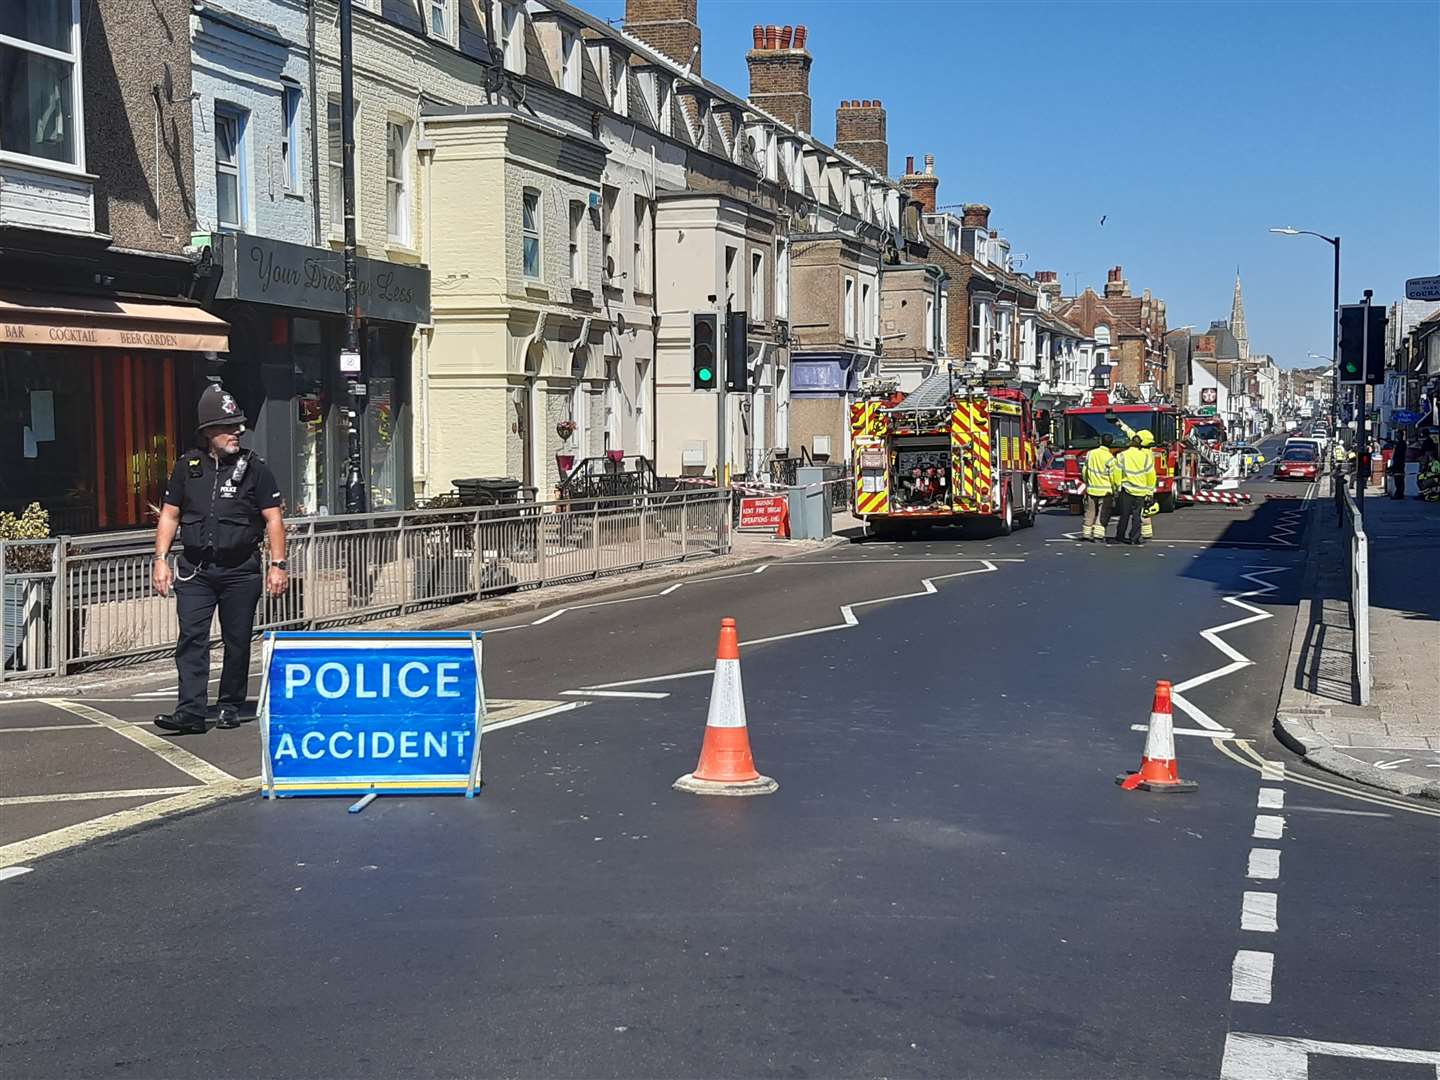 The High Street has been closed between Station Road and Dolphin Street